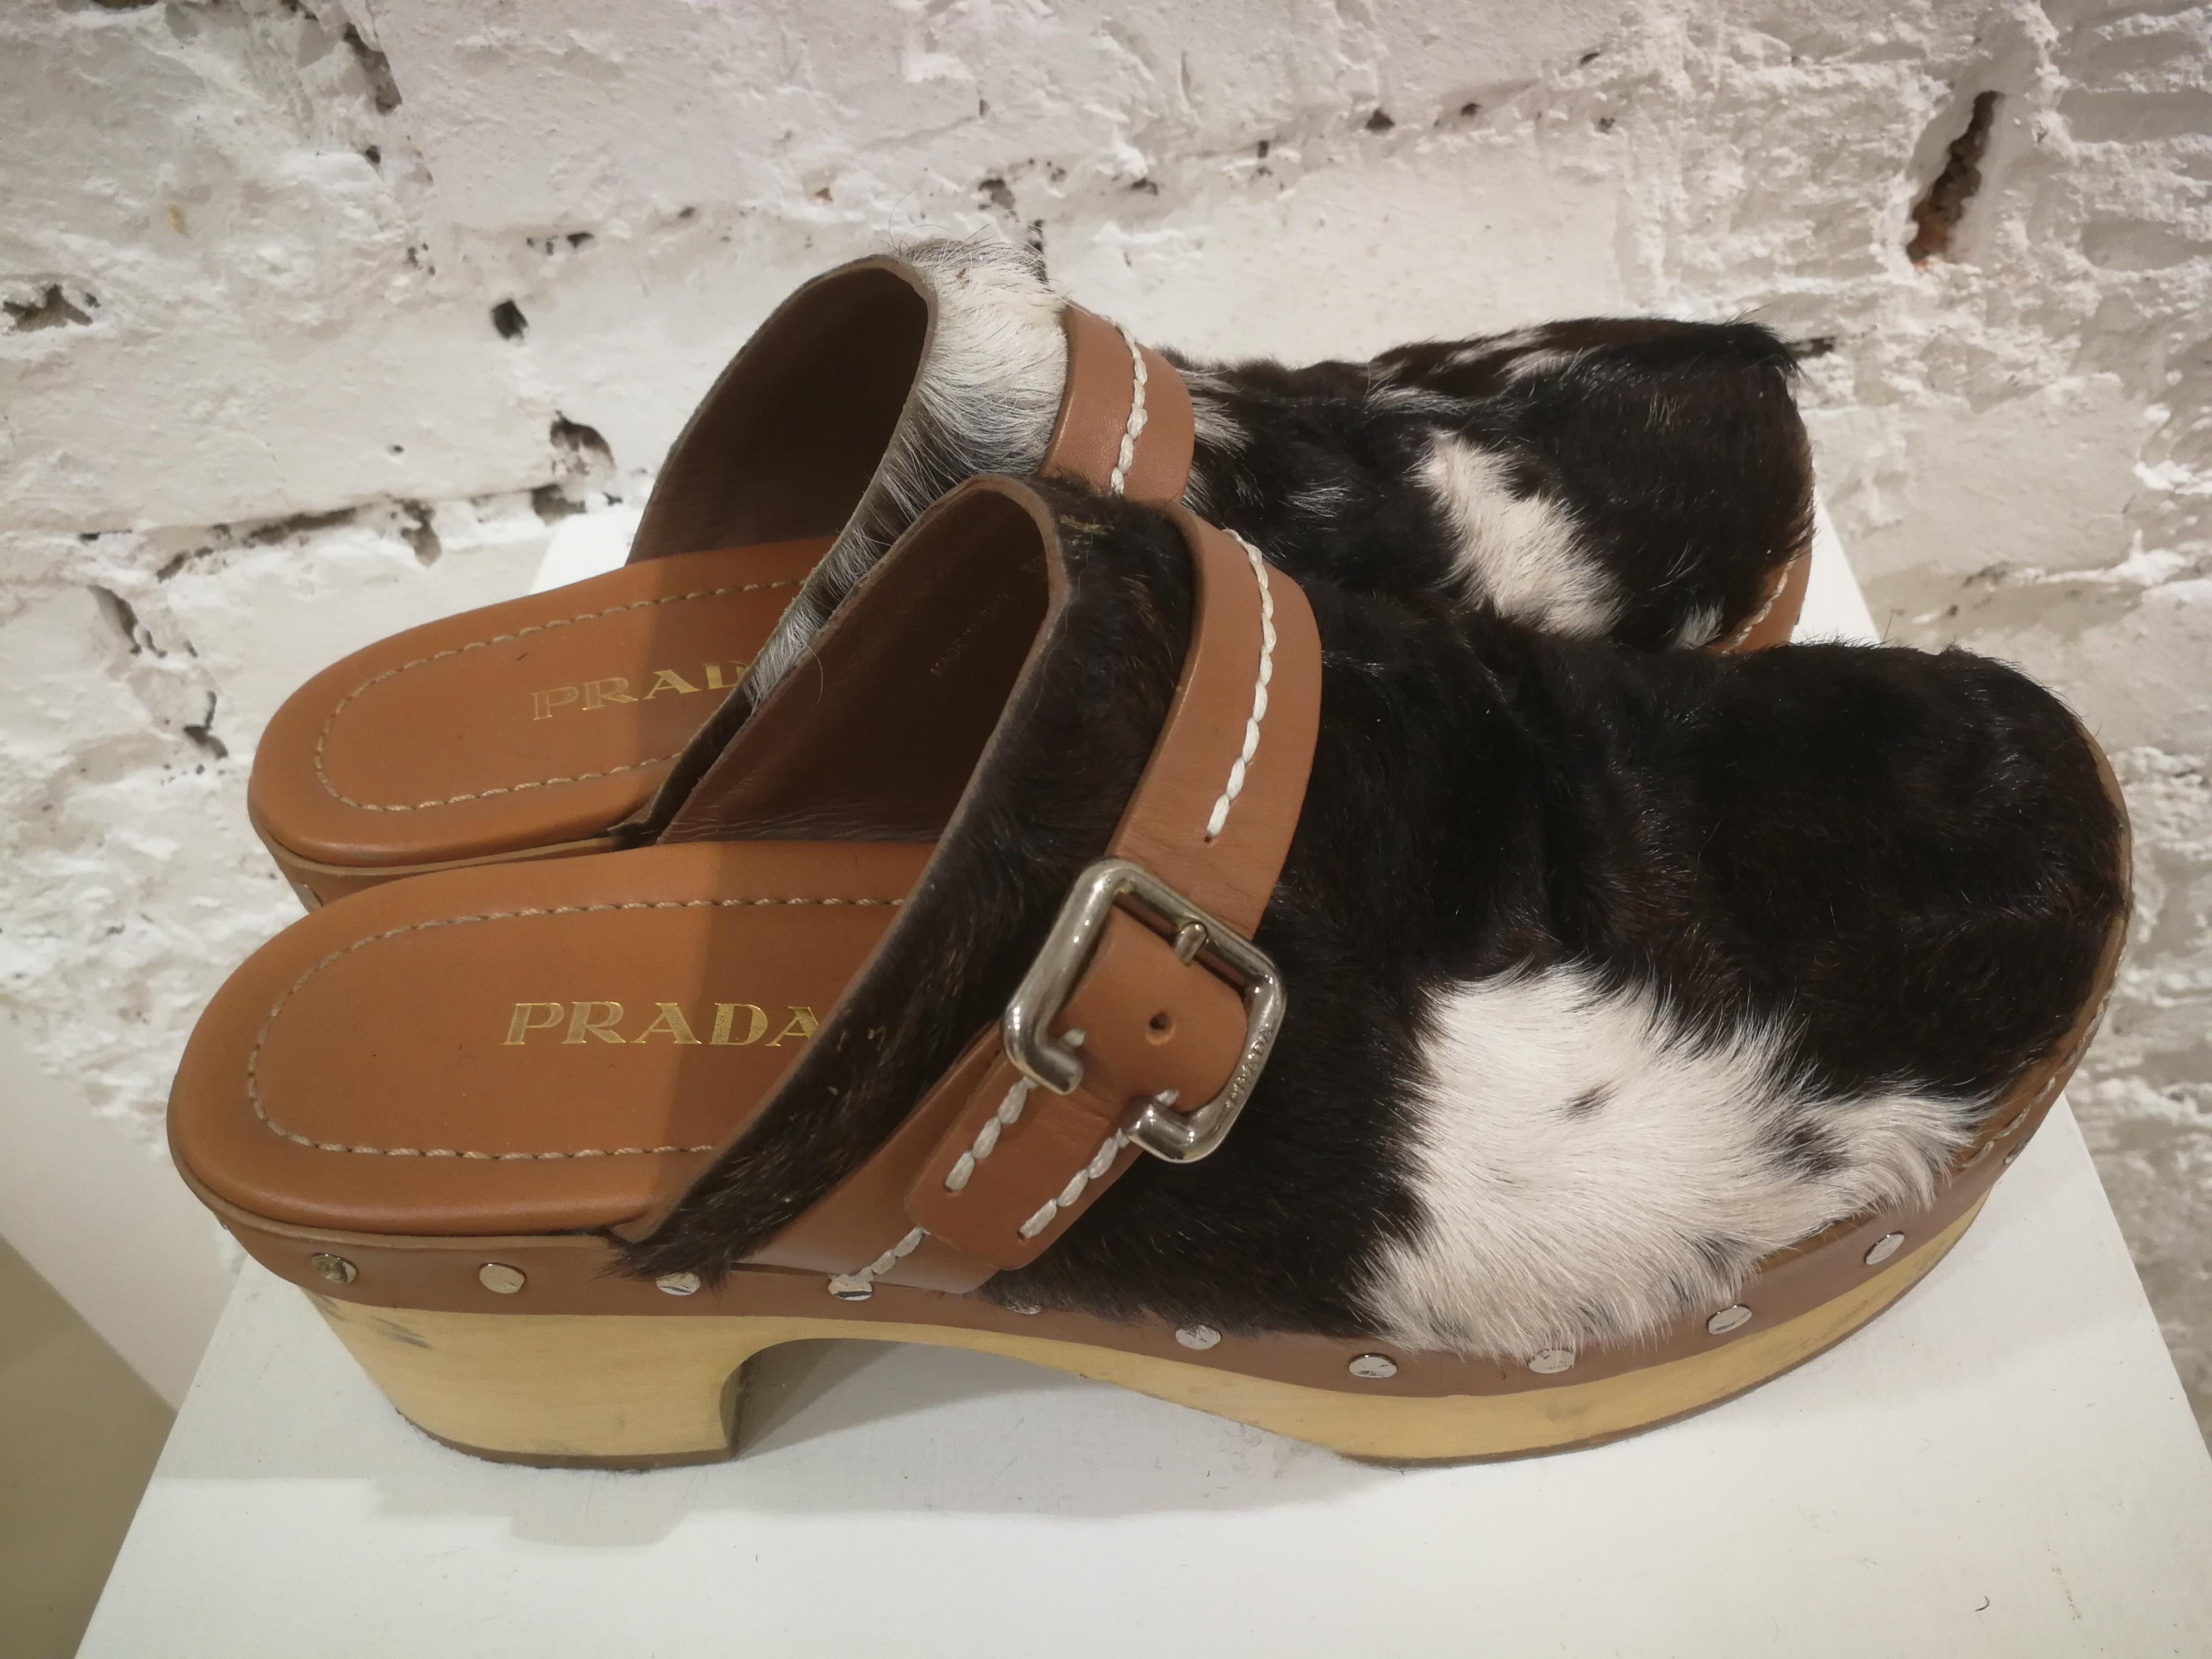 Prada Pony Hair Shoes
Prada pony hair shoes totally made in italy in size 38.5
height: 6 cm